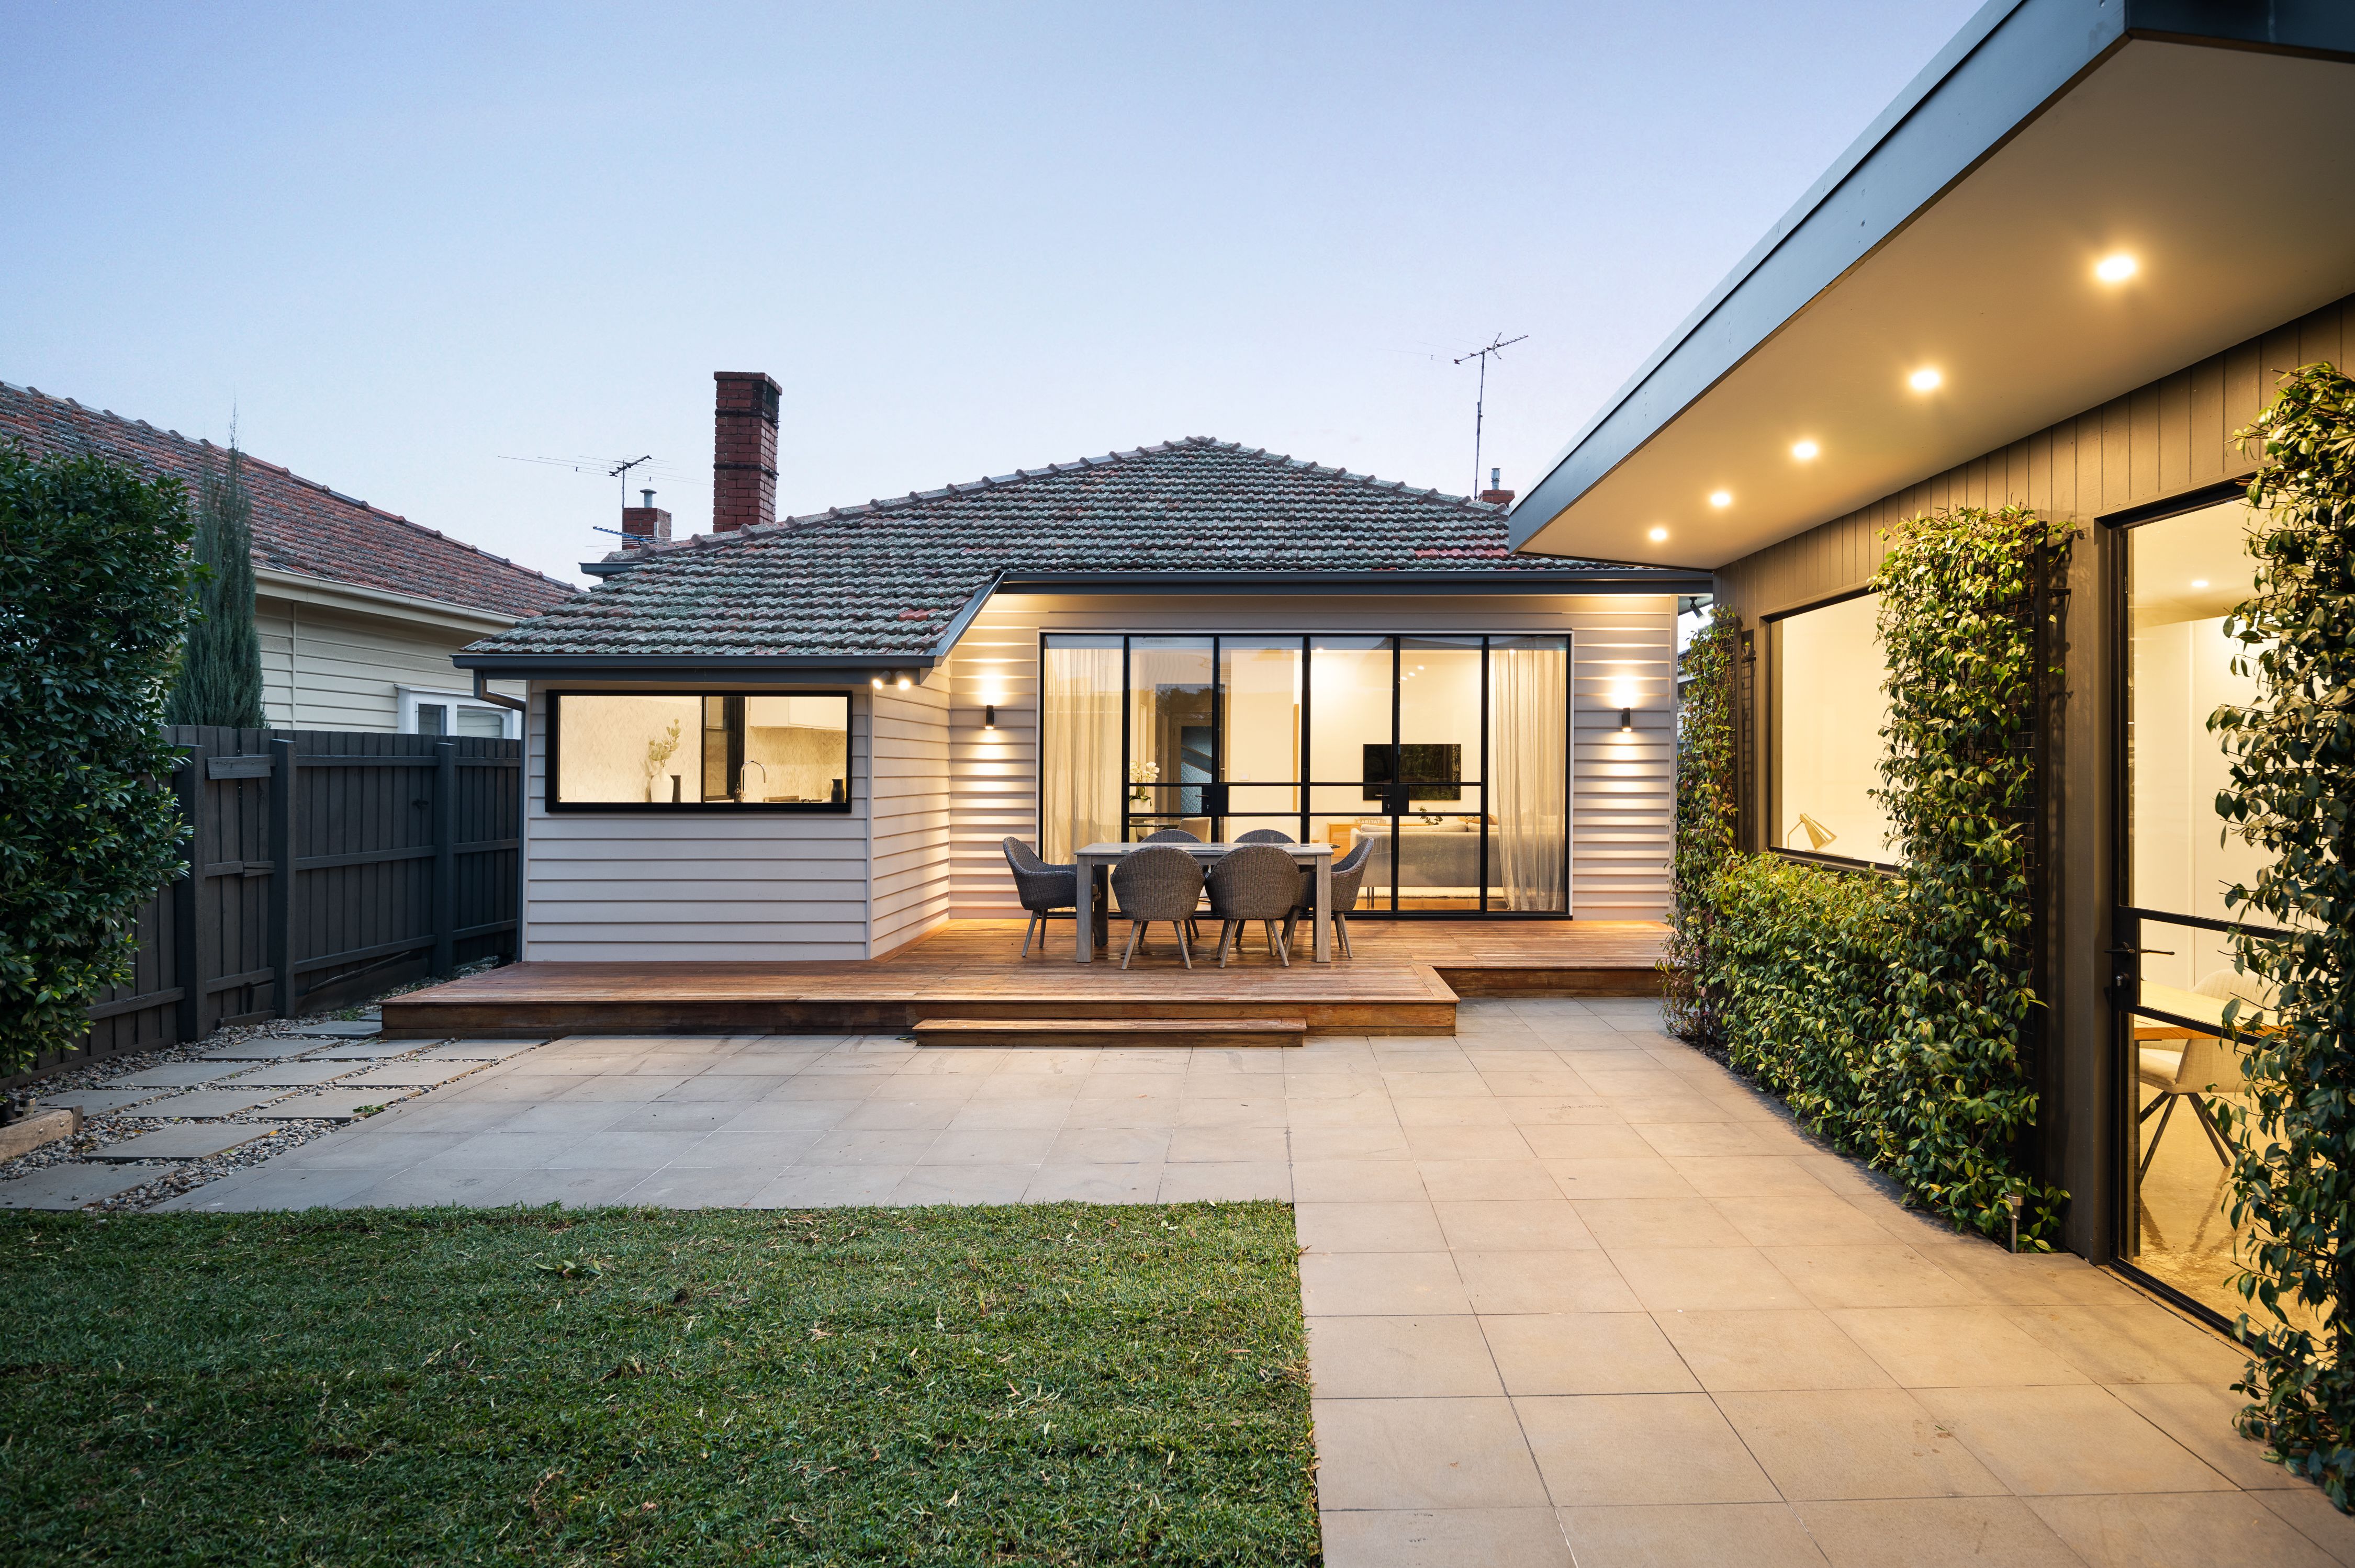 Open for inspection: The best properties to see in Victoria this weekend